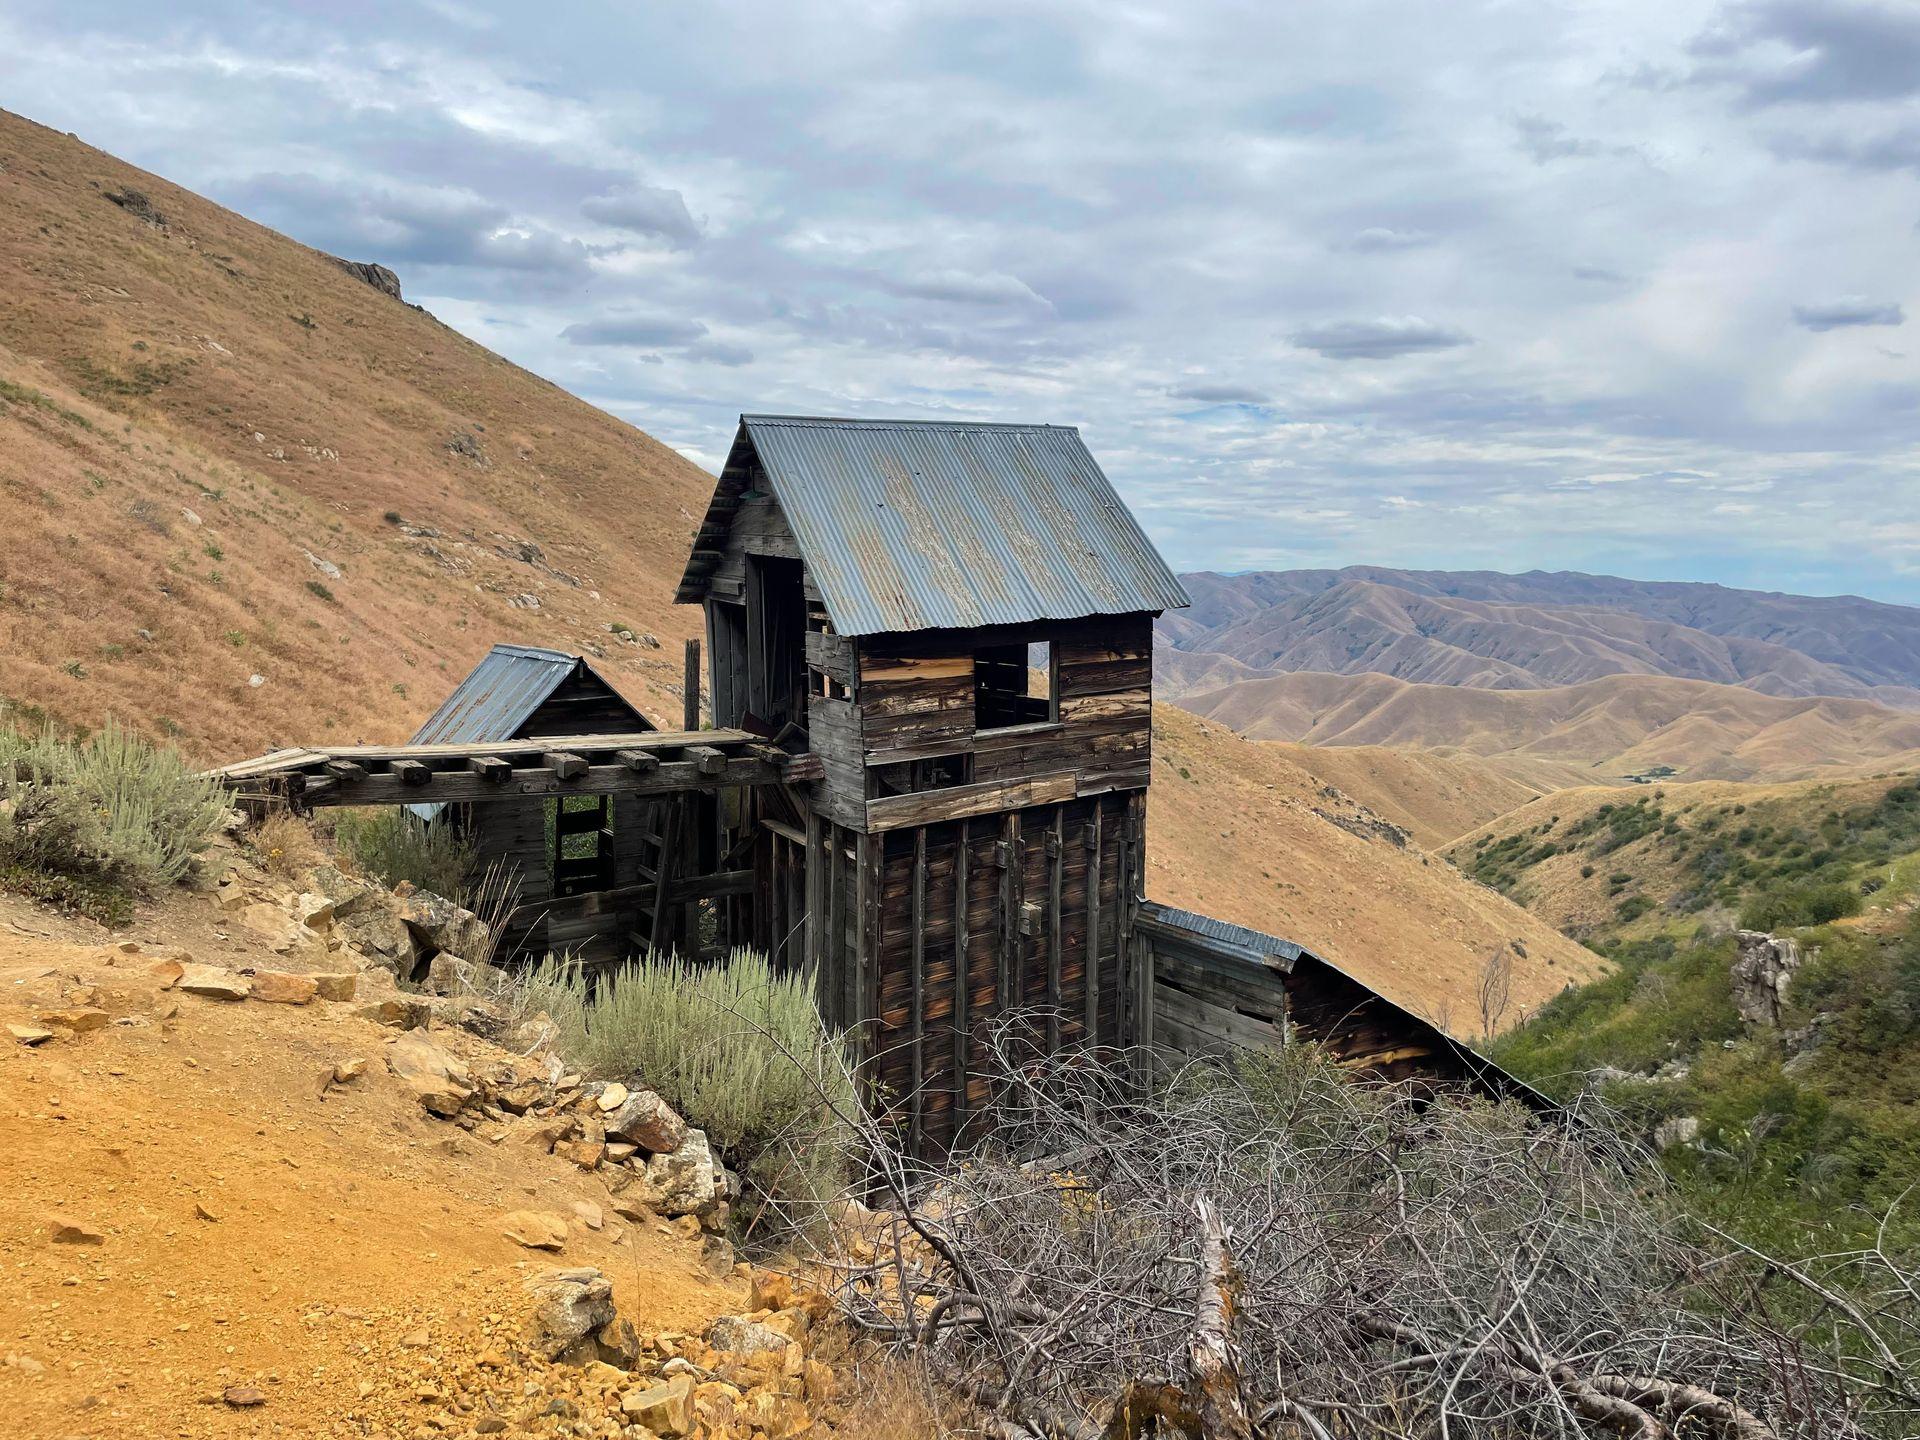 A wood mine building perched on a hill with rolling hills in the distance.